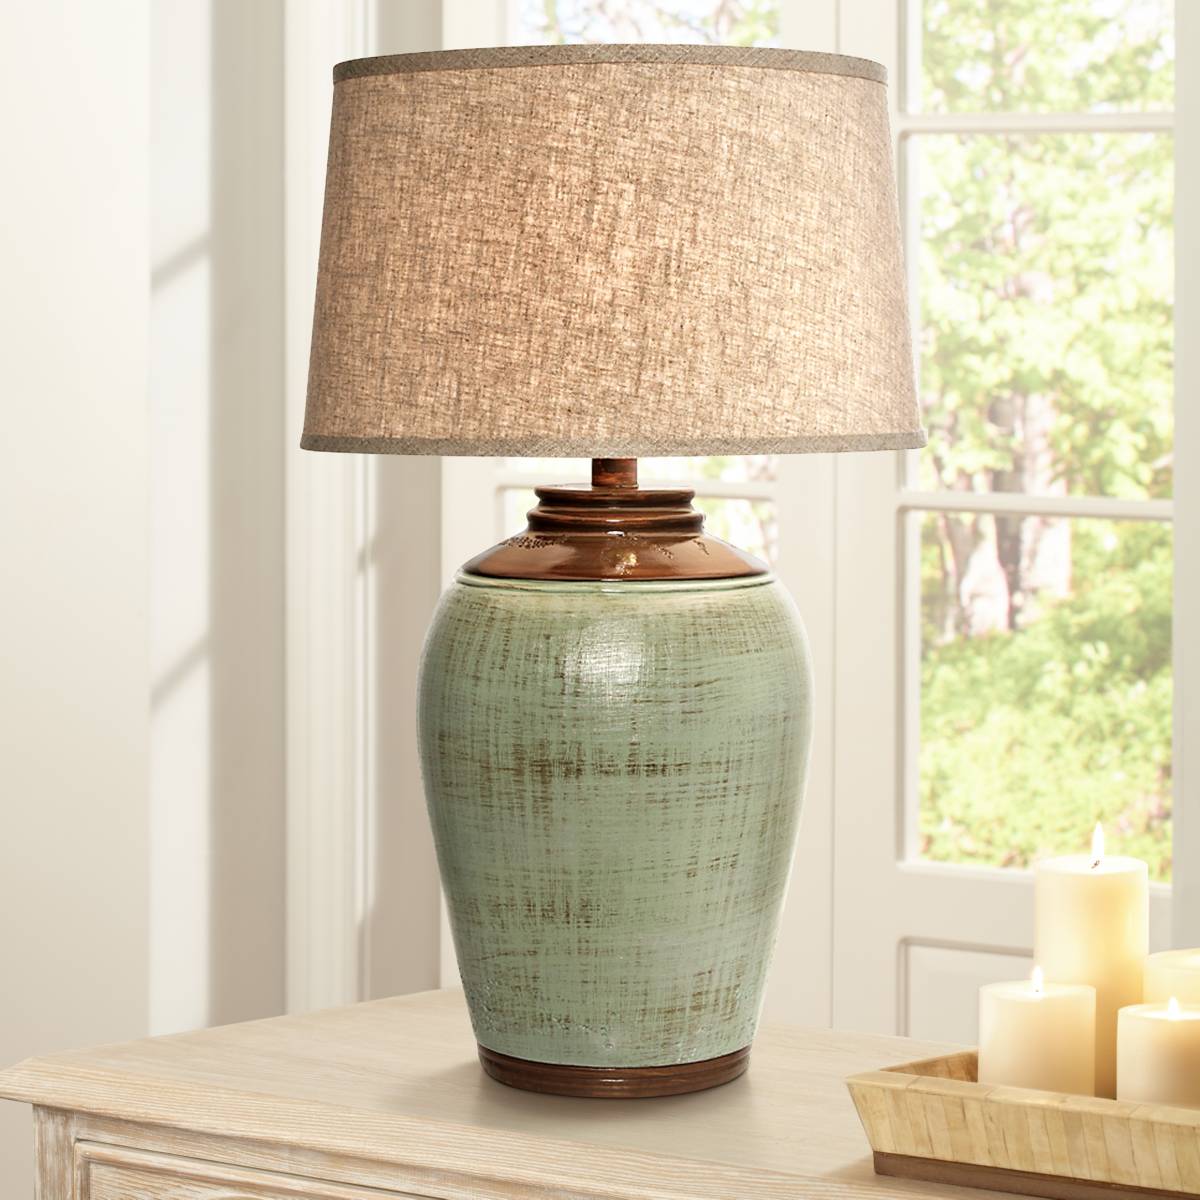 Green, Traditional, Table Lamps | Lamps Plus